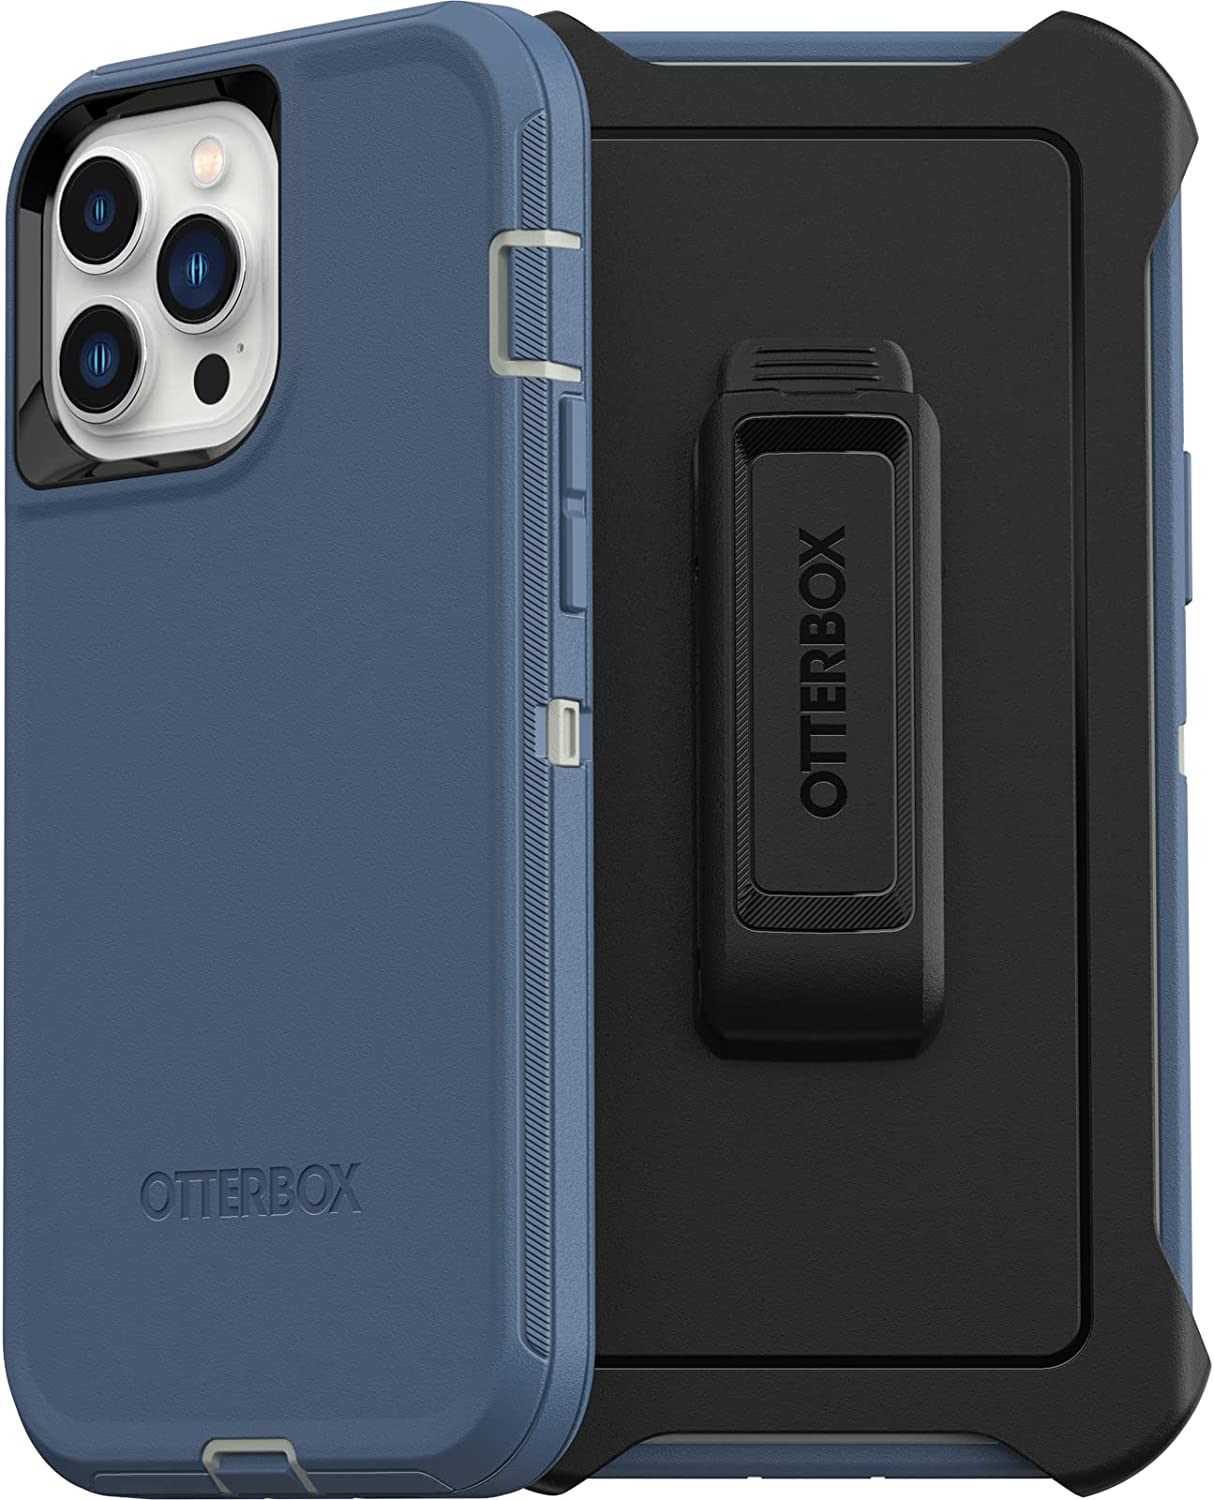 OtterBox DEFENDER SERIES Case for iPhone 13 Pro Max/12 Pro Max - Fort Blue (New)